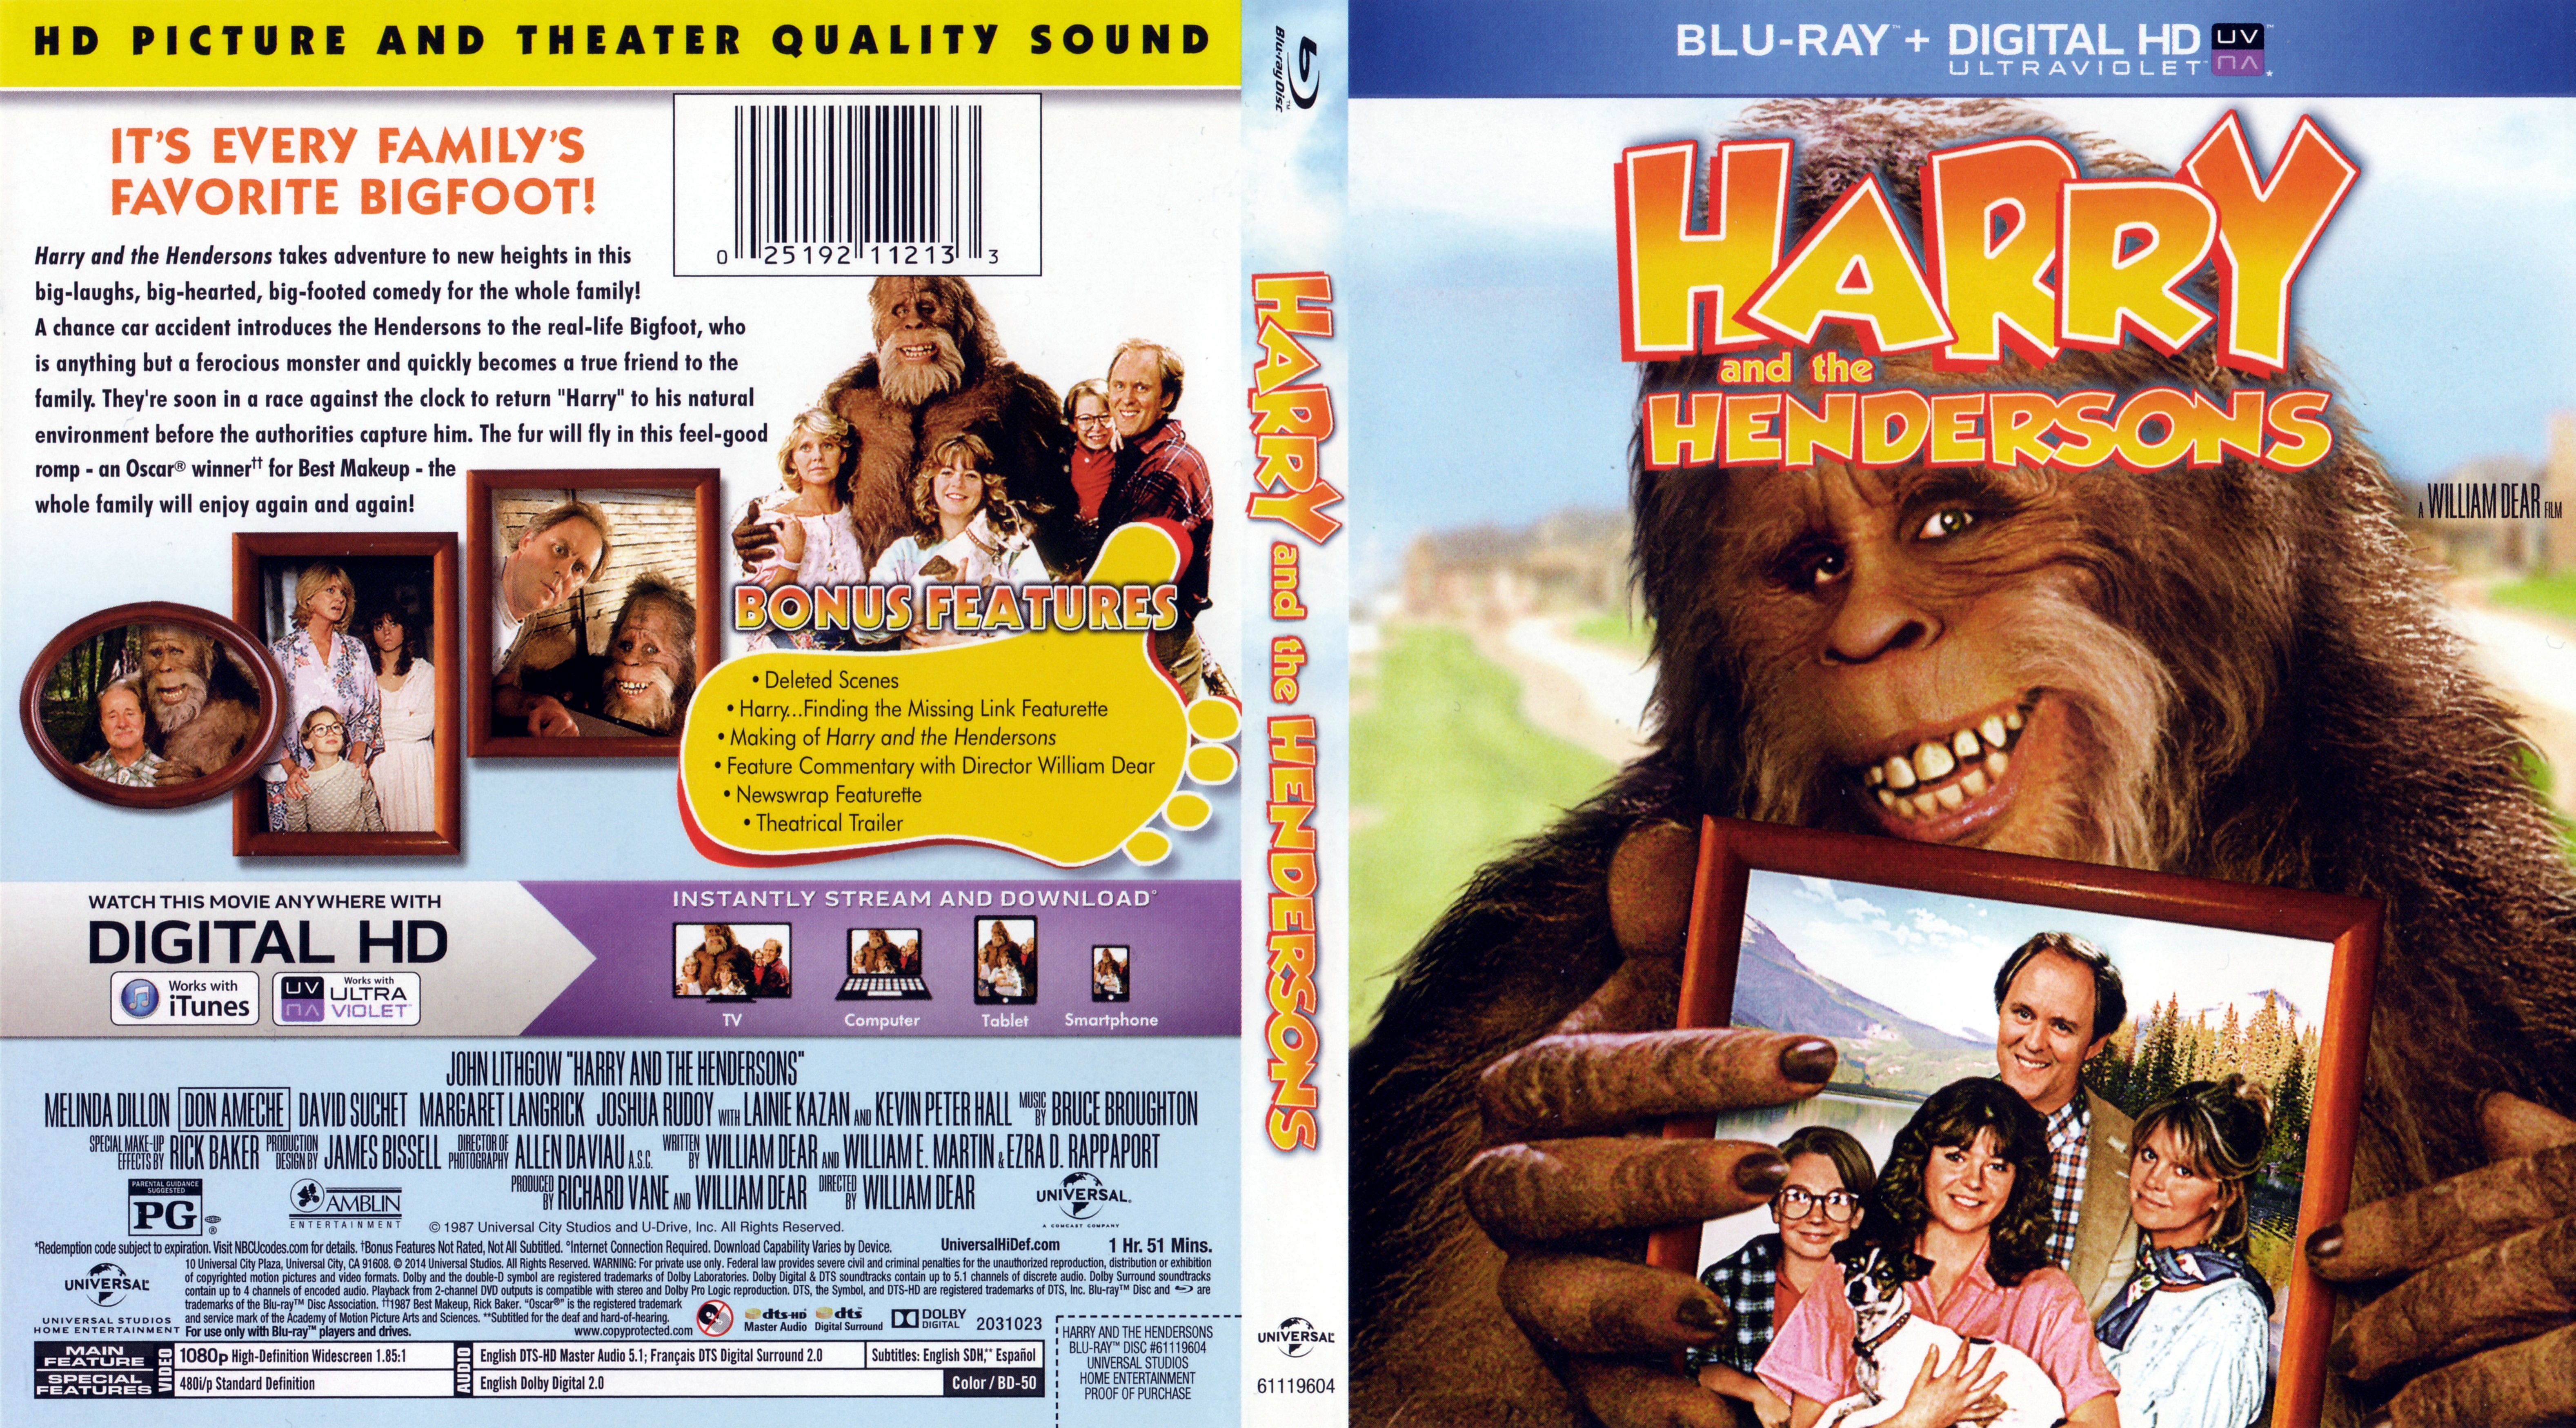 Jaquette DVD Harry and the Hendersons Zone 1 (BLU-RAY)